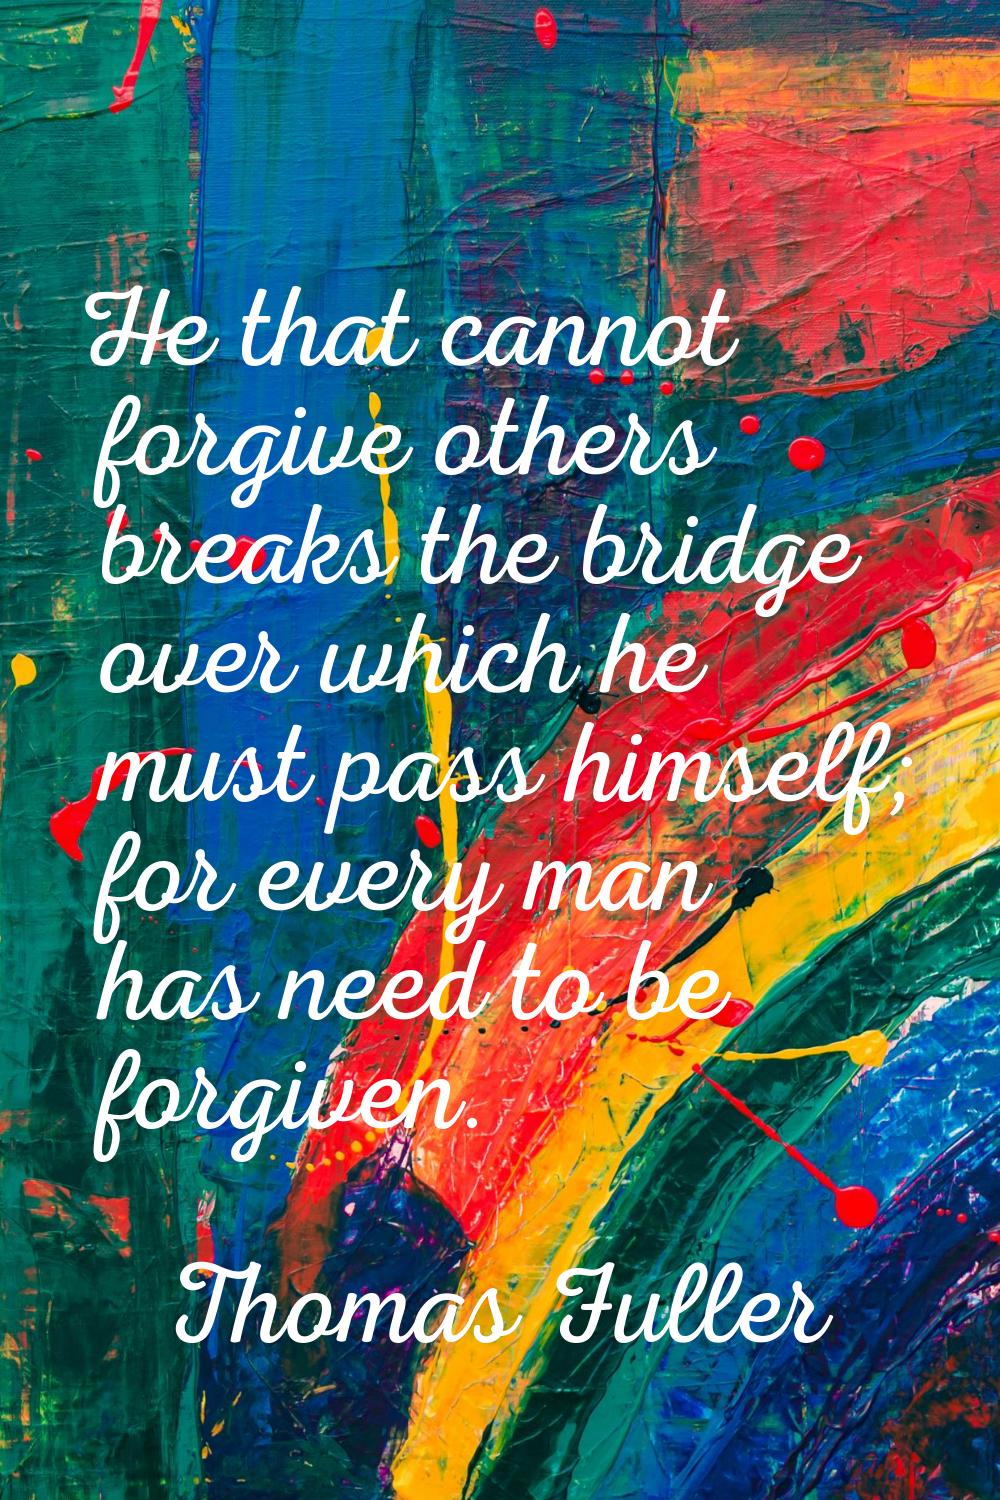 He that cannot forgive others breaks the bridge over which he must pass himself; for every man has 